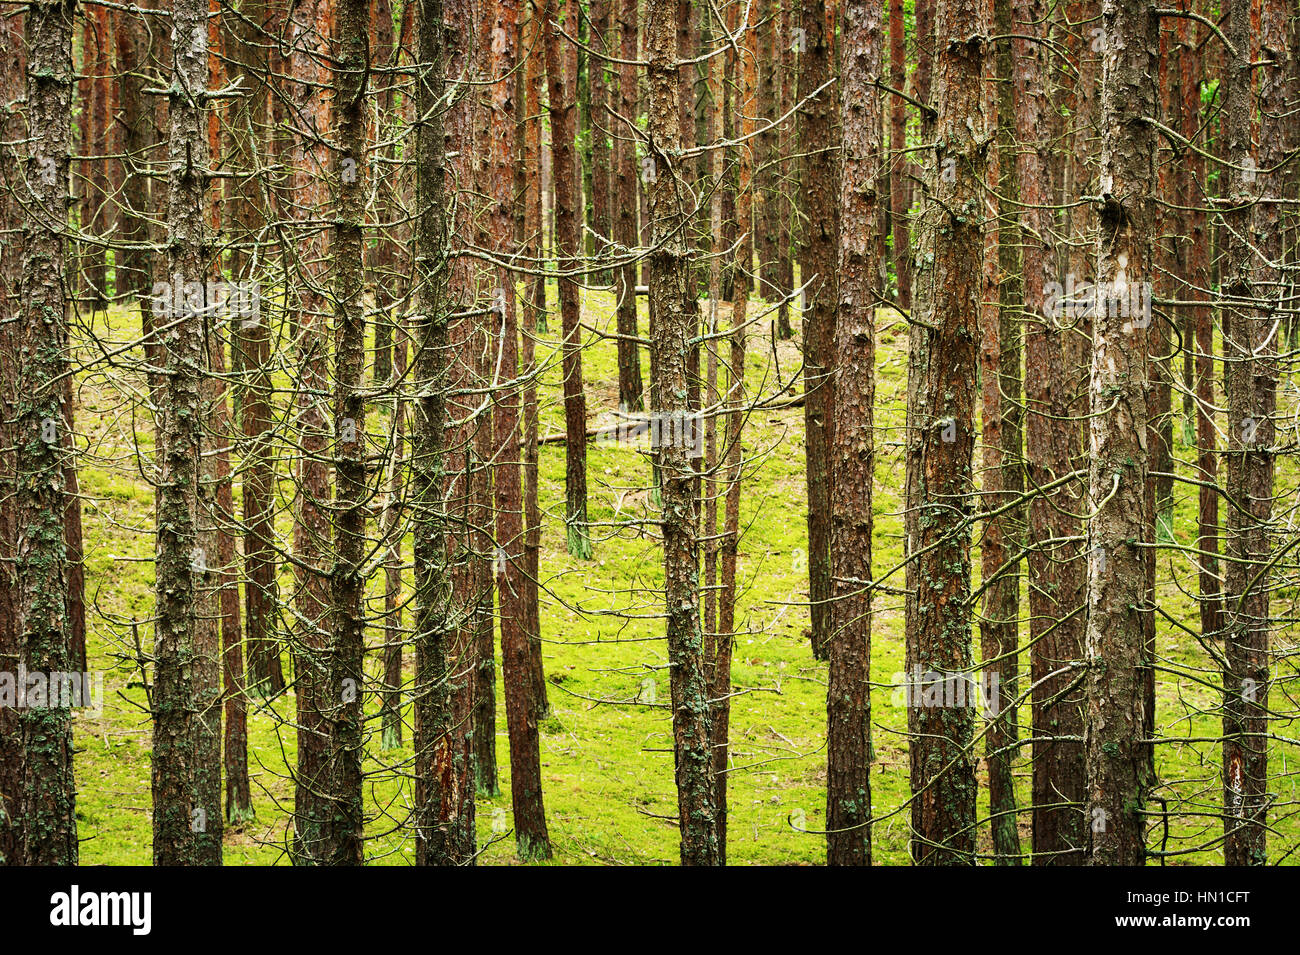 Trunks of the Scots or Scotch pine (Pinus sylvestris) trees growing in young evergreen coniferous forest. Pomerania, Poland. Stock Photo